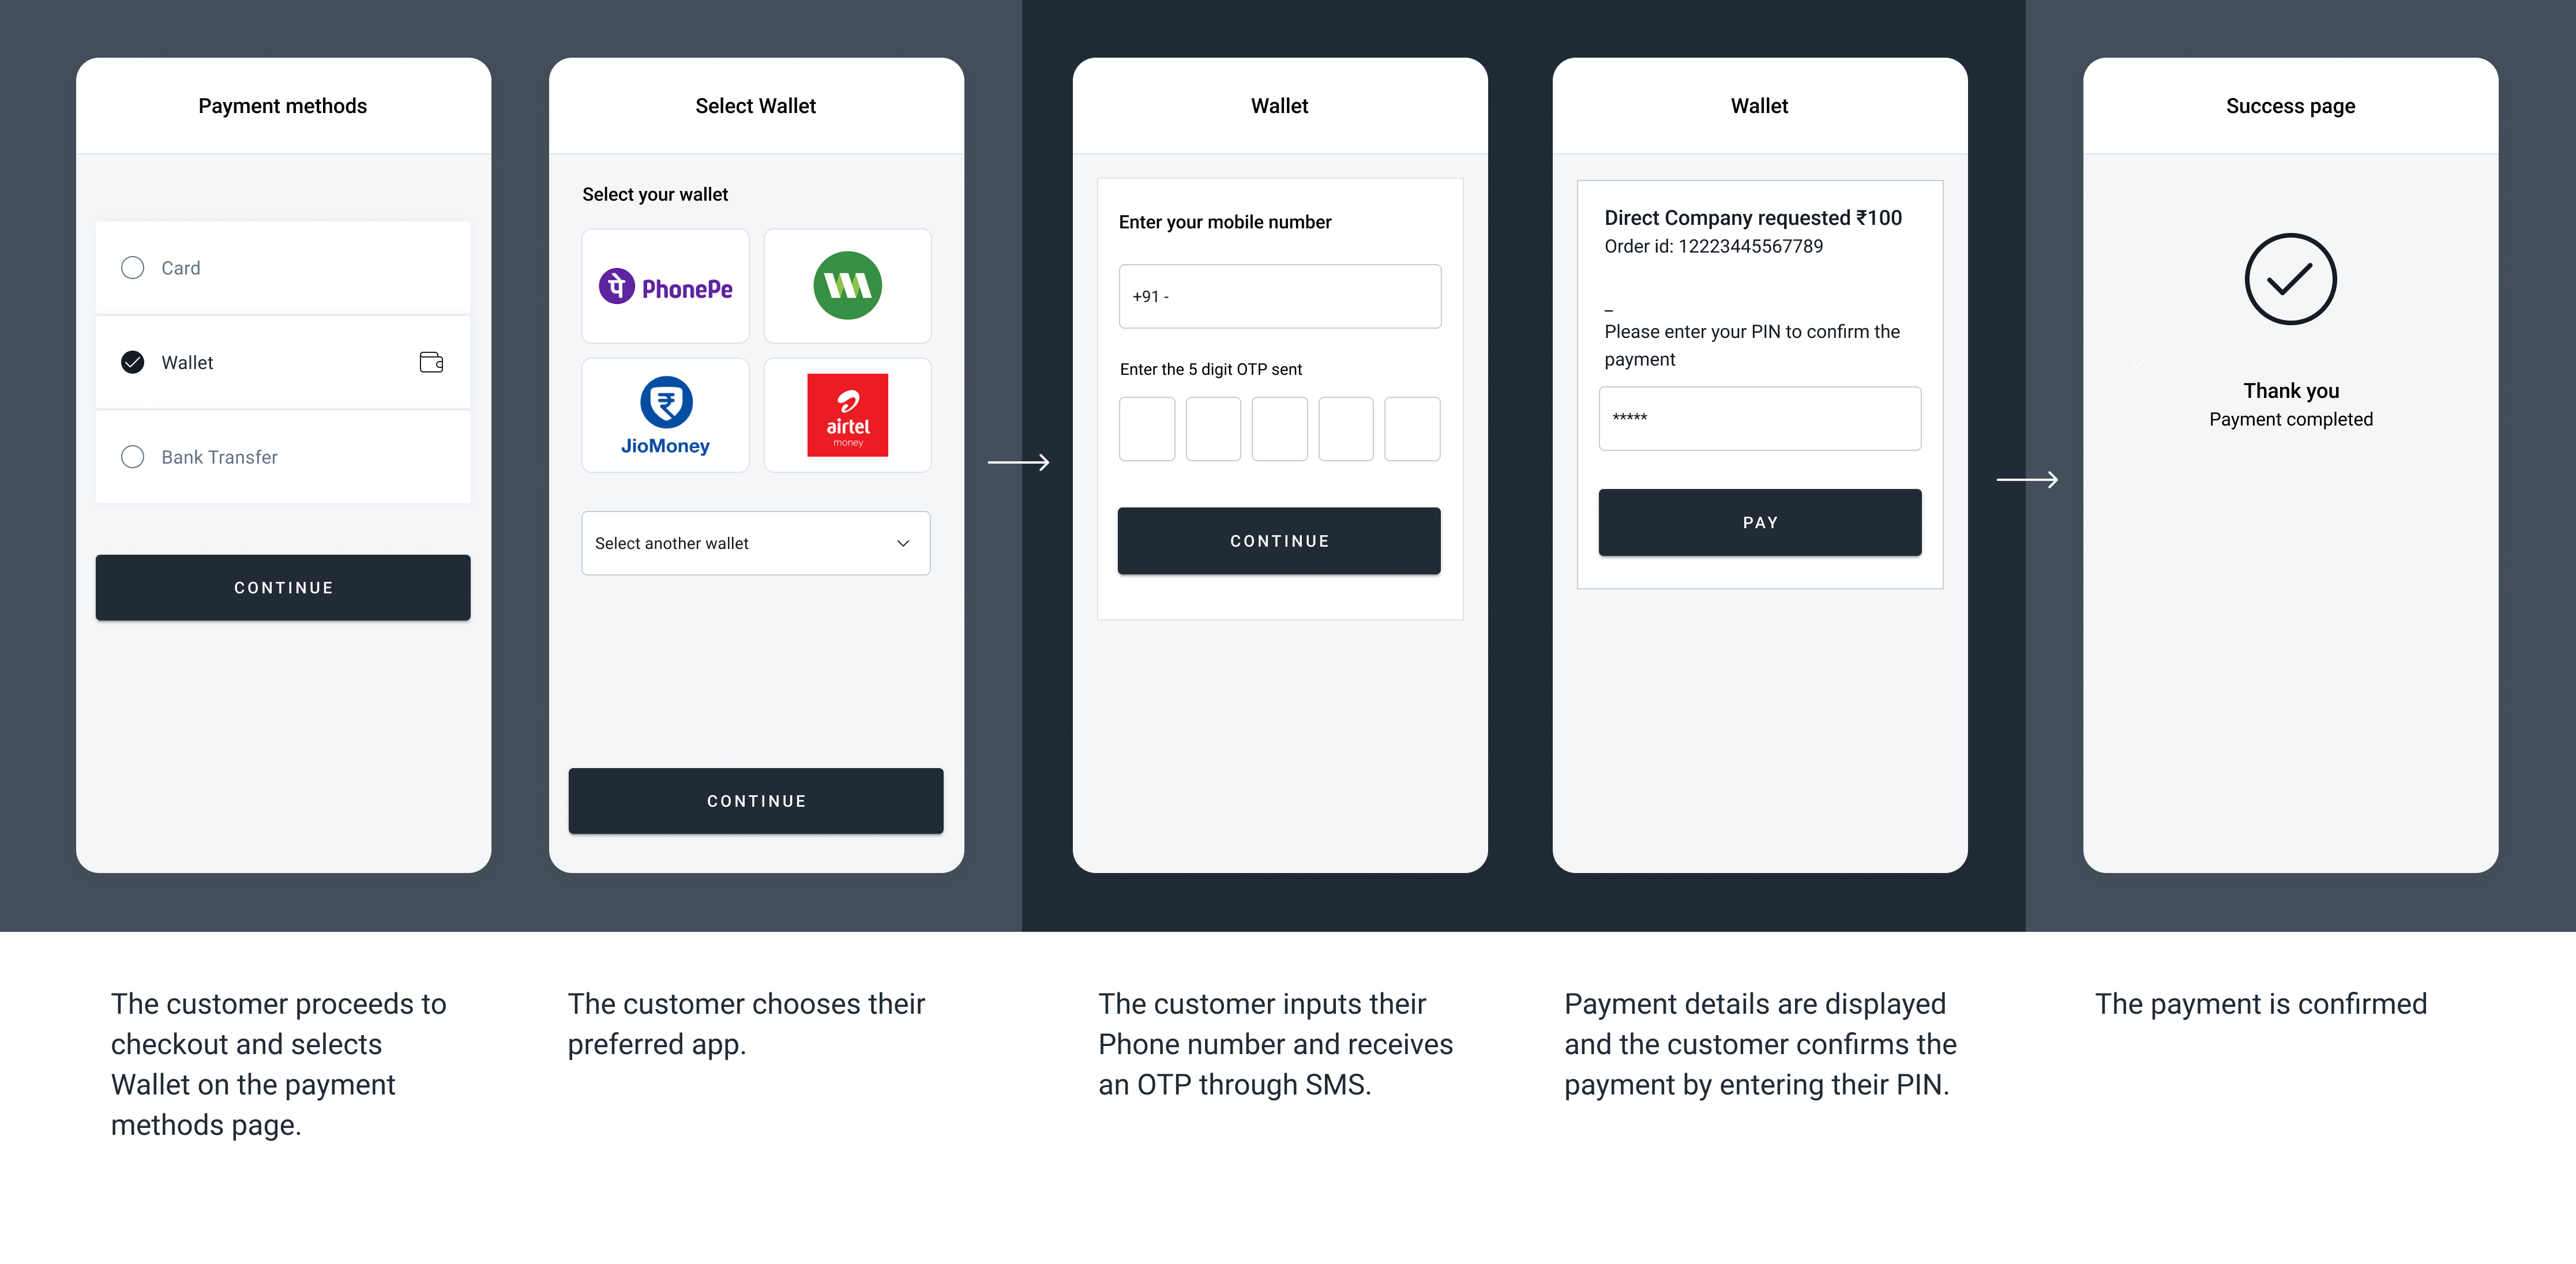 The screenshots illustrate a generic wallet redirect flow.  
The specifics of the flow can change depending on the payment method selected to complete the transaction.